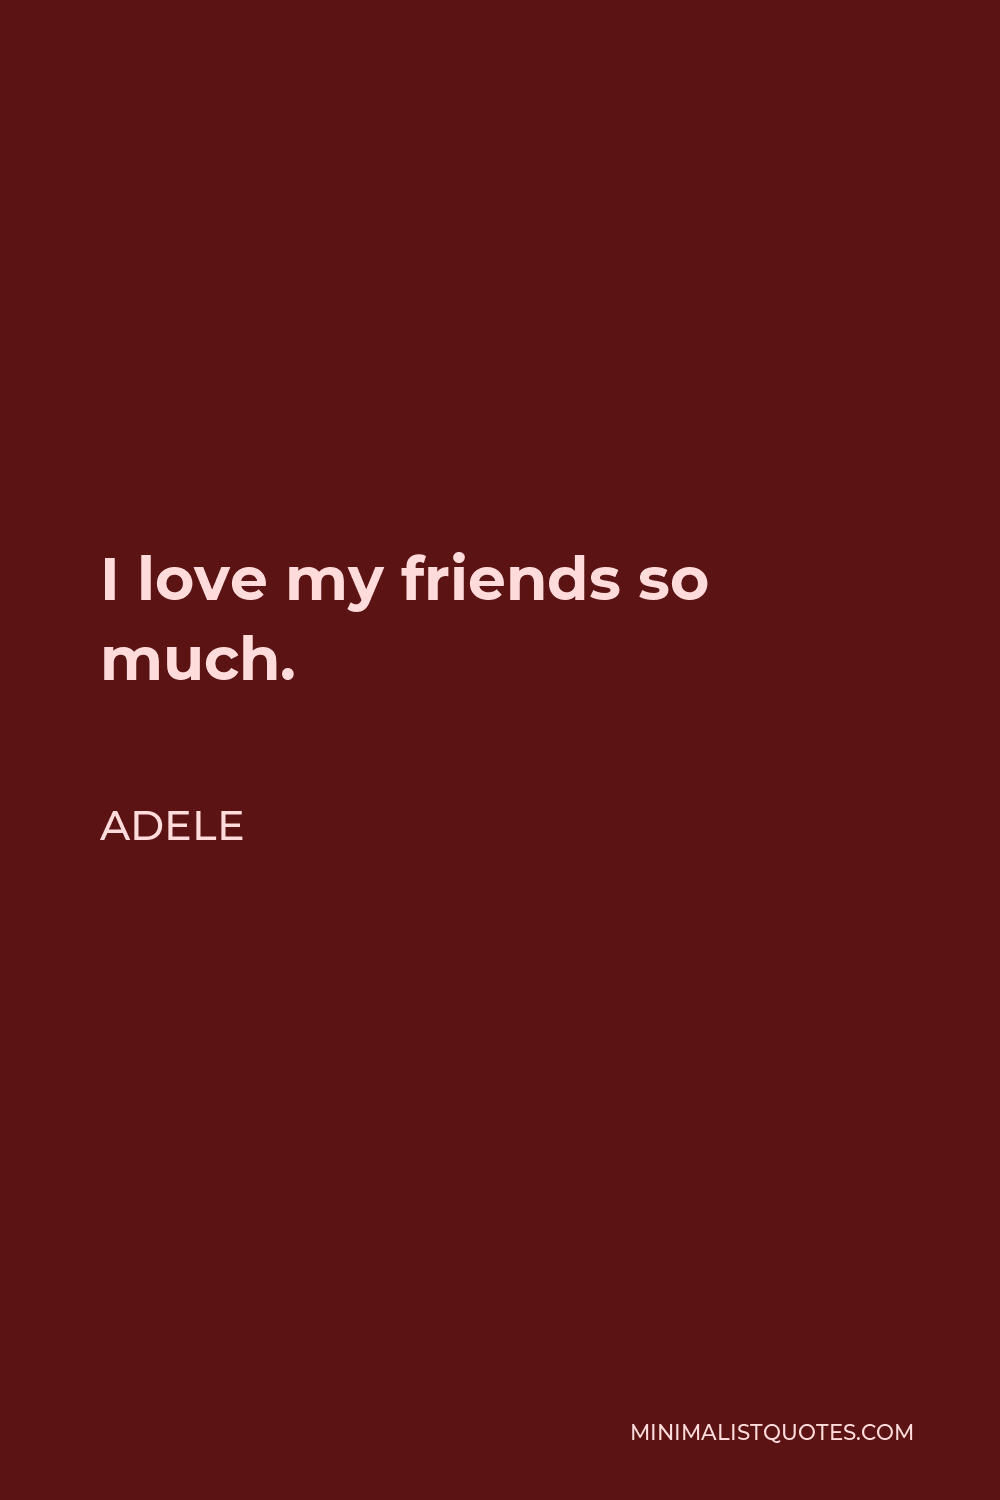 Adele Quote: I love my friends so much.